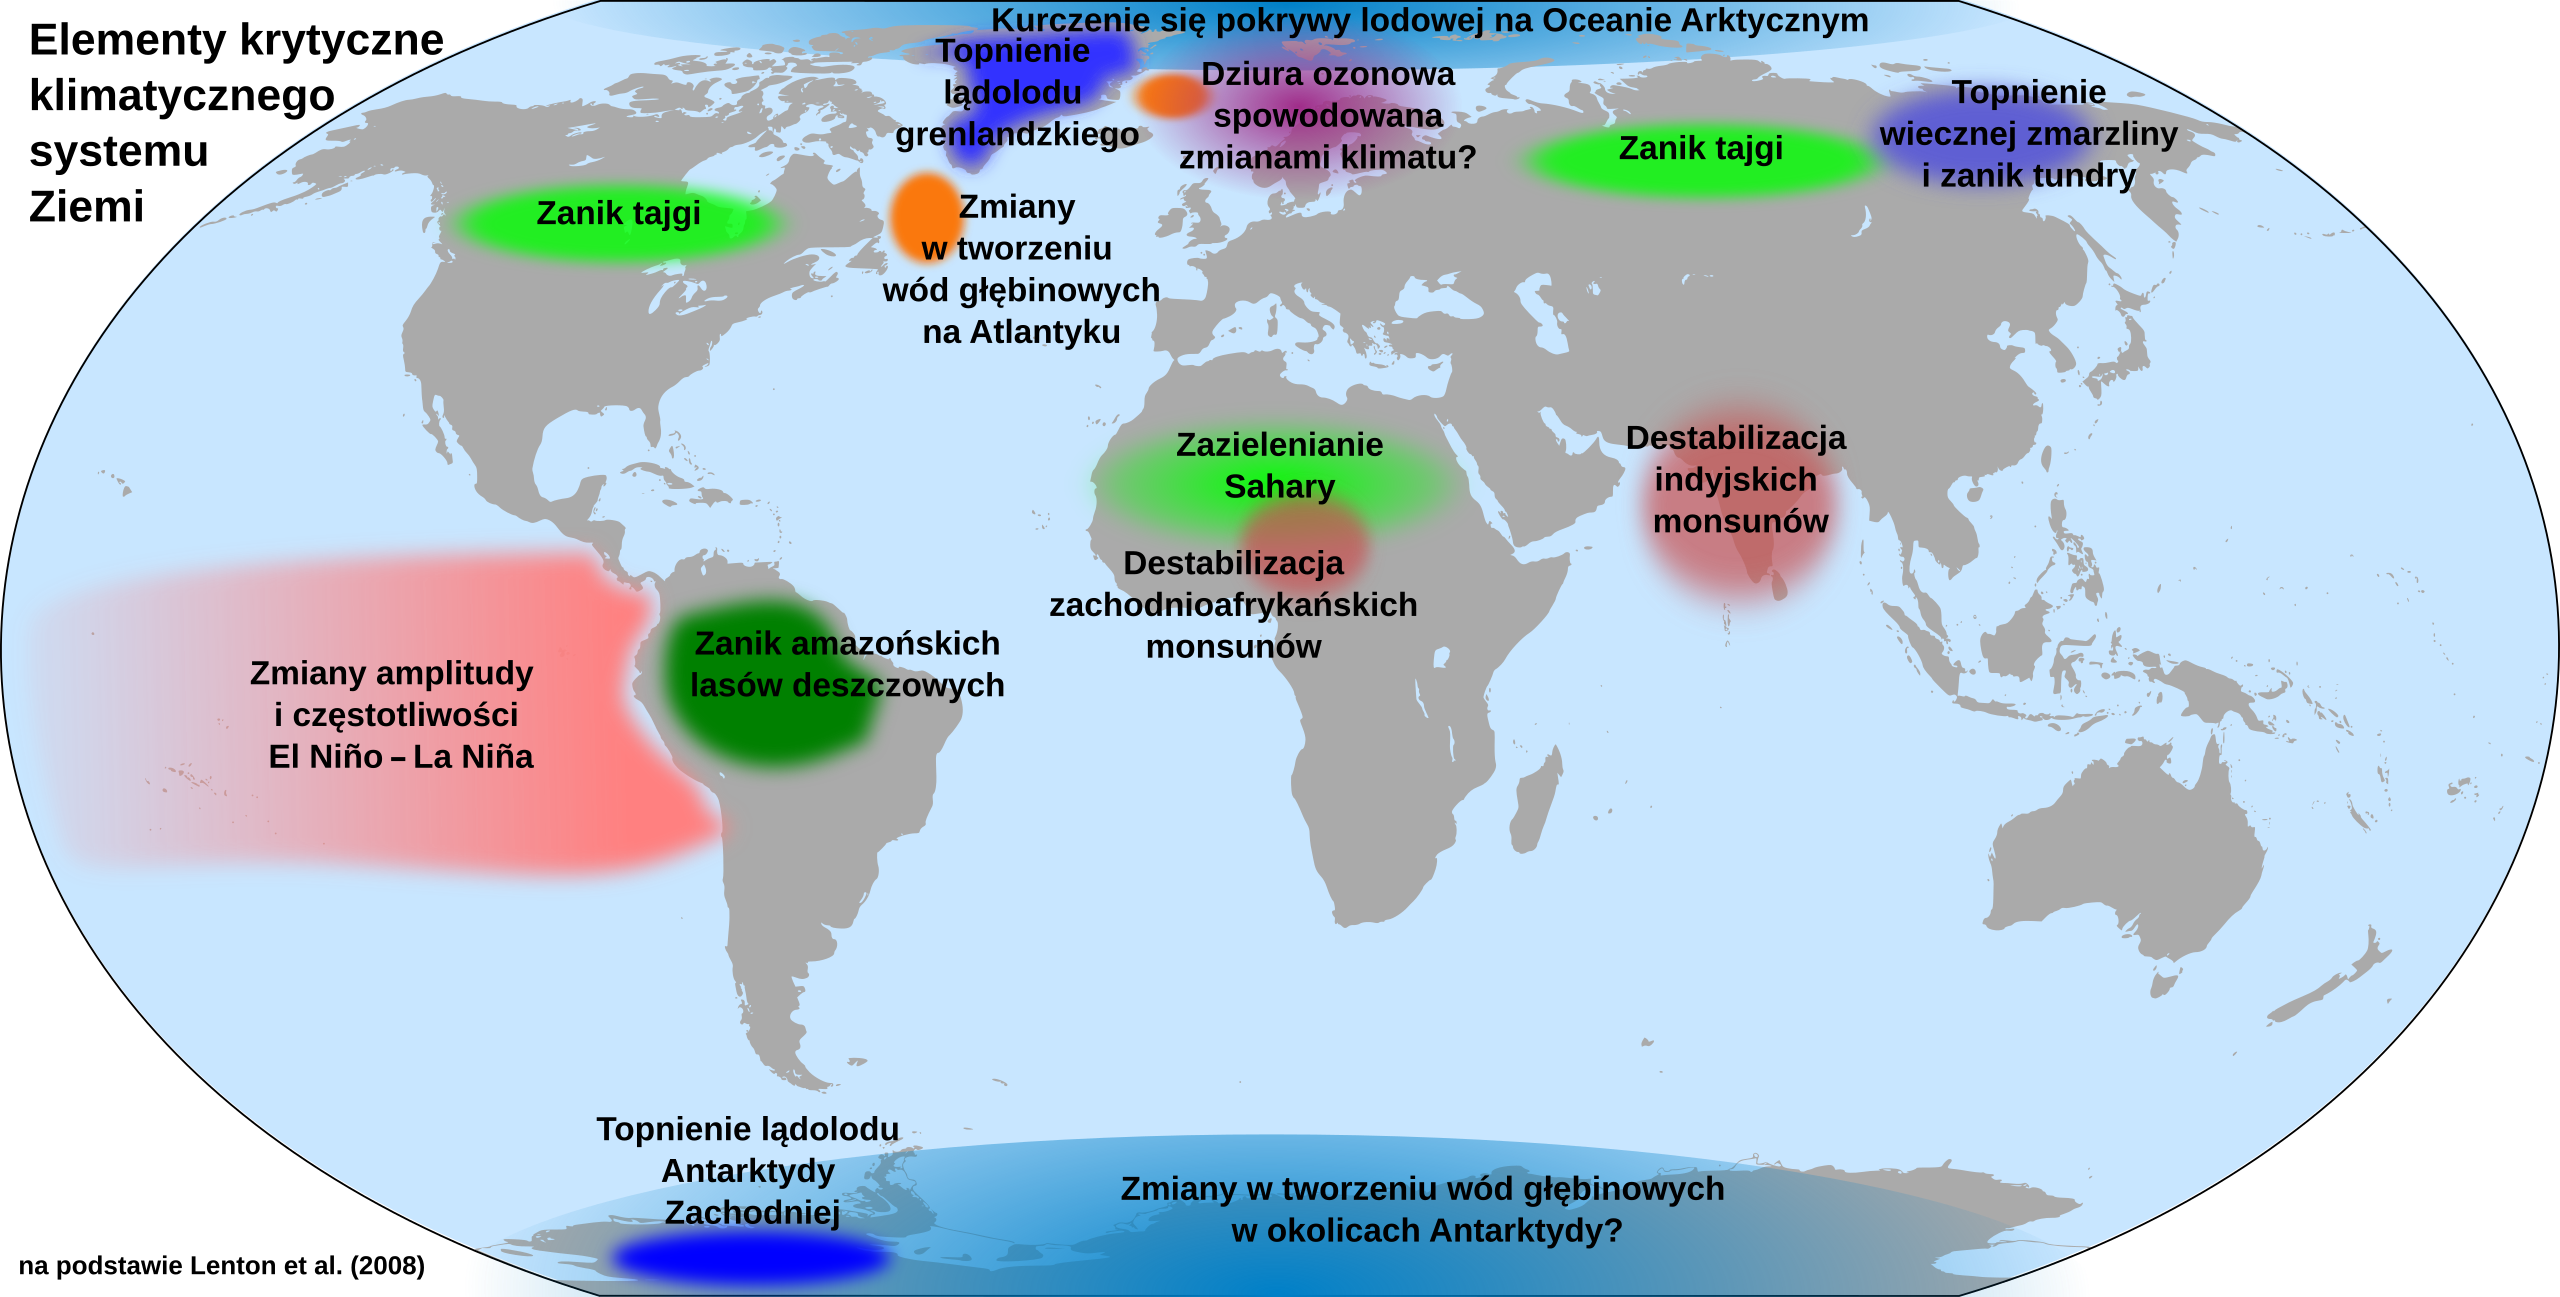 Tipping points in the climate system - Wikipedia